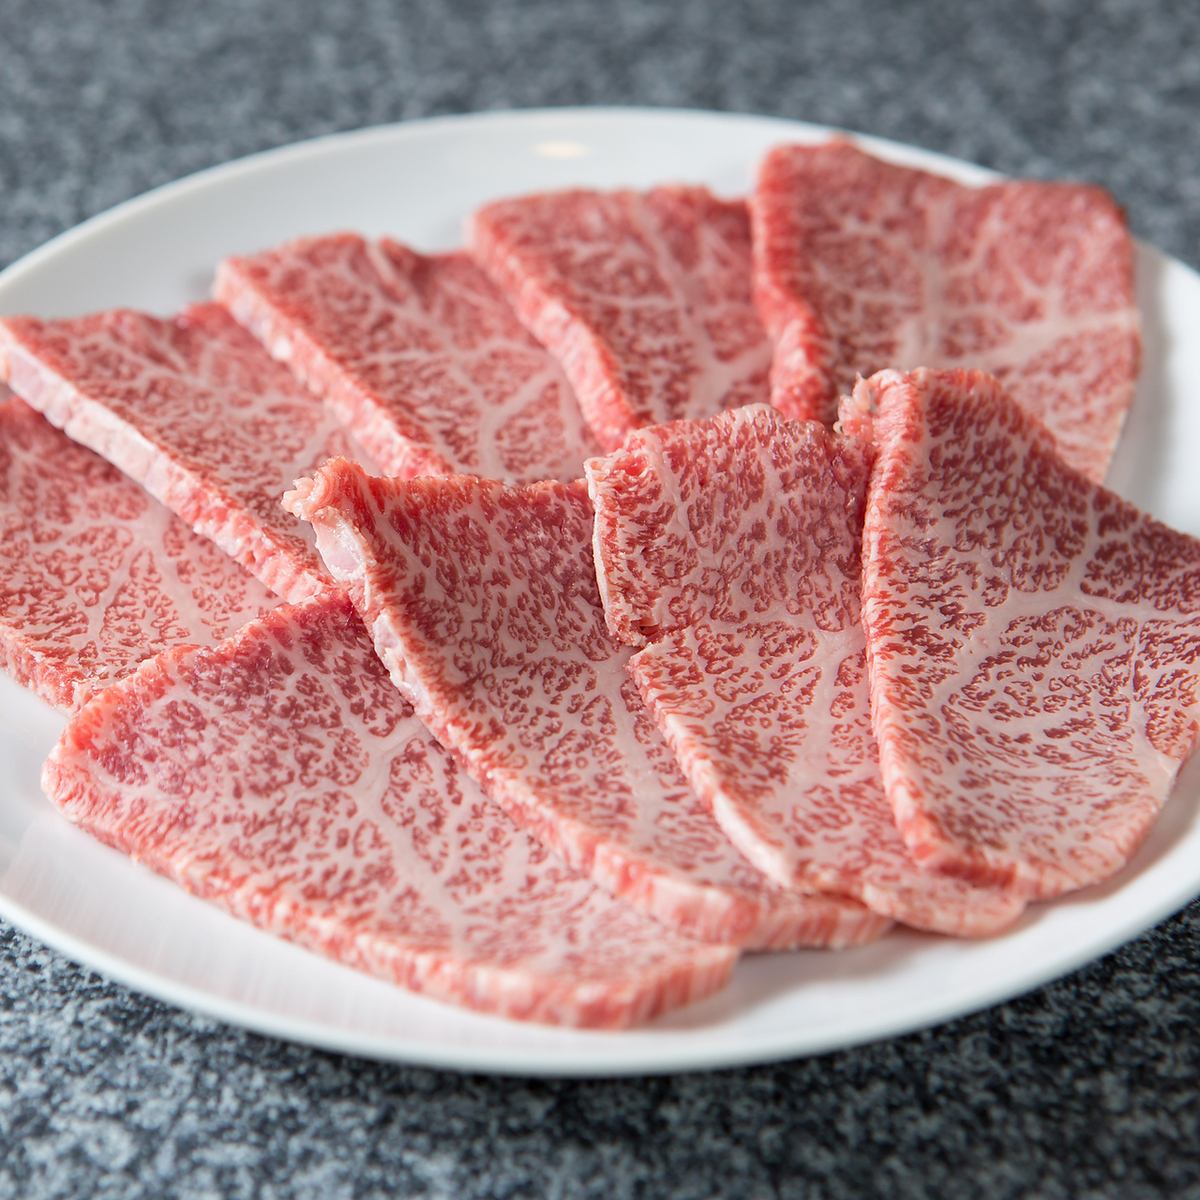 The meat is carefully selected to be of high quality and fresh, so it's exquisite♪